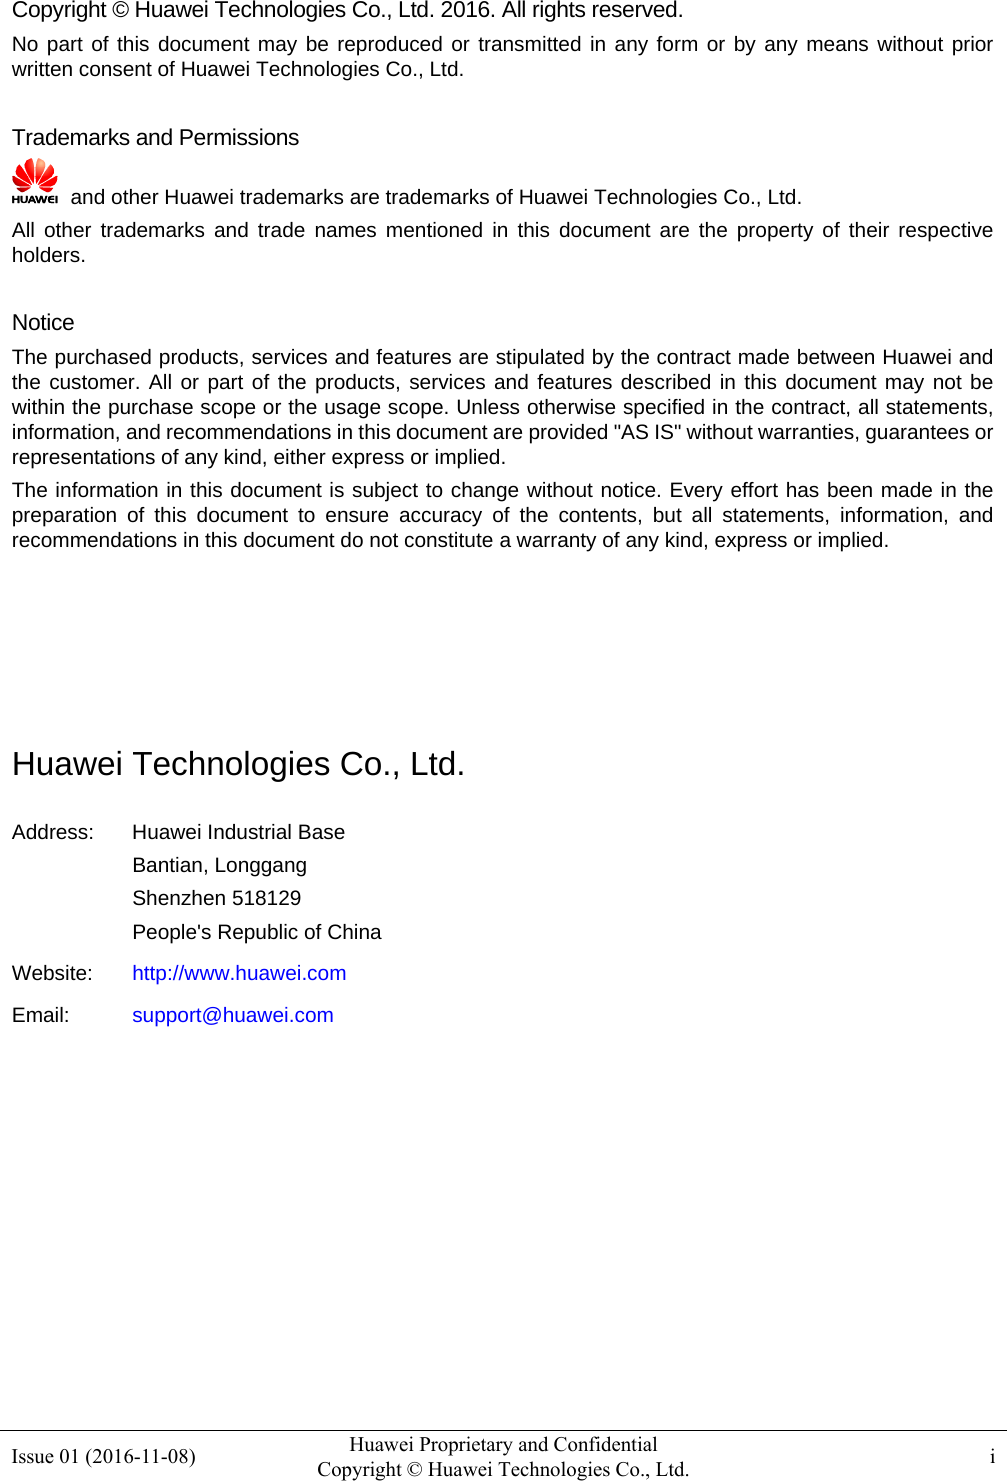  Issue 01 (2016-11-08)  Huawei Proprietary and Confidential         Copyright © Huawei Technologies Co., Ltd. i  Copyright © Huawei Technologies Co., Ltd. 2016. All rights reserved. No part of this document may be reproduced or transmitted in any form or by any means without prior written consent of Huawei Technologies Co., Ltd.  Trademarks and Permissions   and other Huawei trademarks are trademarks of Huawei Technologies Co., Ltd. All other trademarks and trade names mentioned in this document are the property of their respective holders.  Notice The purchased products, services and features are stipulated by the contract made between Huawei and the customer. All or part of the products, services and features described in this document may not be within the purchase scope or the usage scope. Unless otherwise specified in the contract, all statements, information, and recommendations in this document are provided &quot;AS IS&quot; without warranties, guarantees or representations of any kind, either express or implied. The information in this document is subject to change without notice. Every effort has been made in the preparation of this document to ensure accuracy of the contents, but all statements, information, and recommendations in this document do not constitute a warranty of any kind, express or implied.     Huawei Technologies Co., Ltd. Address:  Huawei Industrial Base Bantian, Longgang Shenzhen 518129 People&apos;s Republic of China Website:  http://www.huawei.com Email:  support@huawei.com          